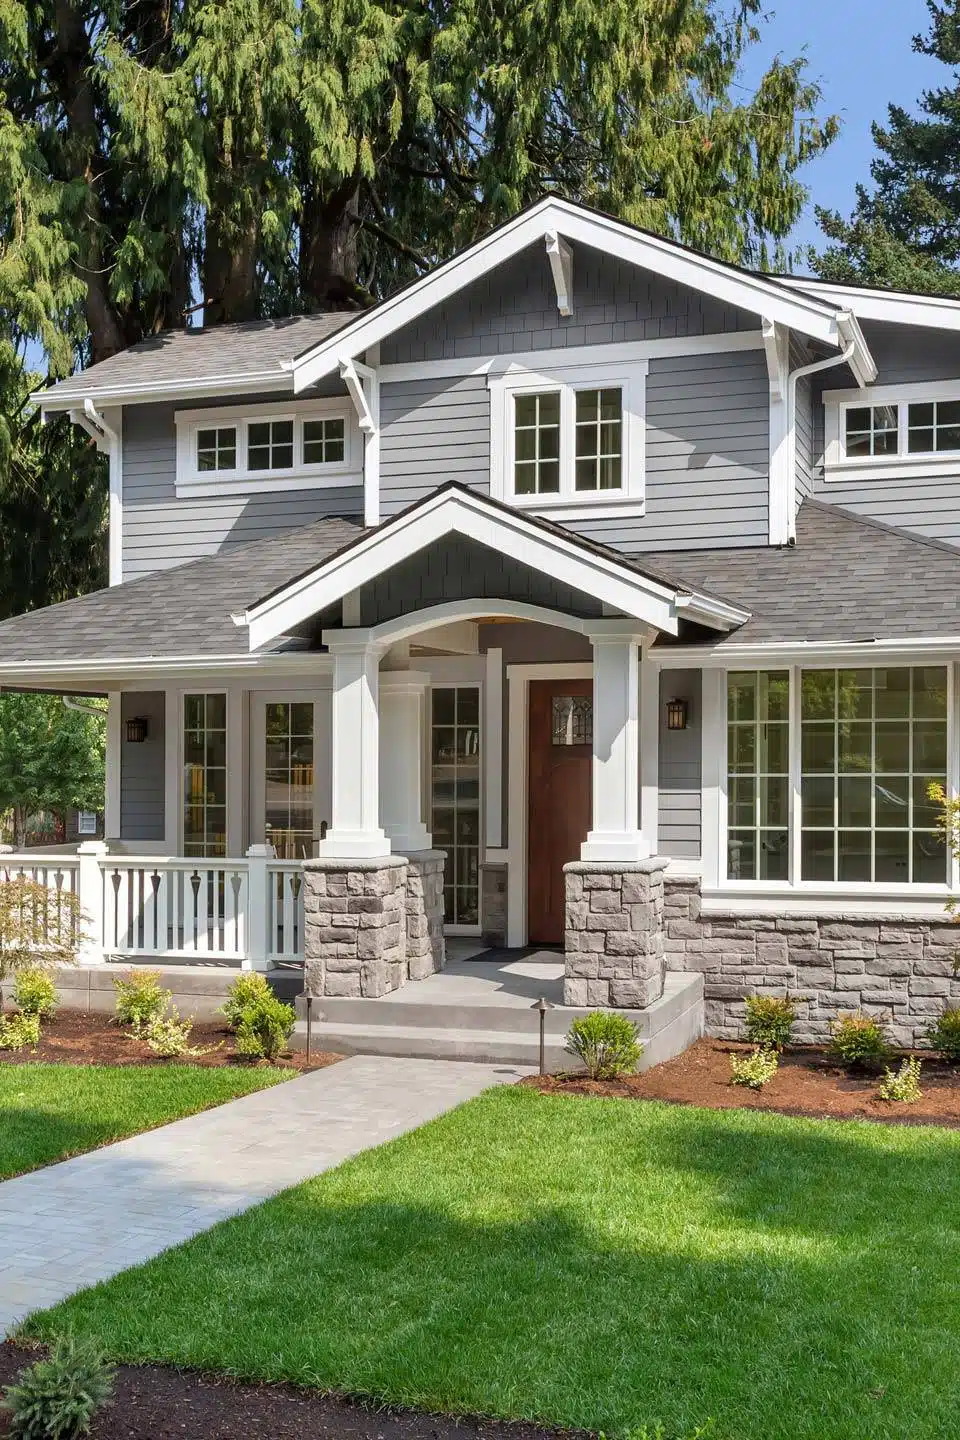 Two story house with gray siding and white trim